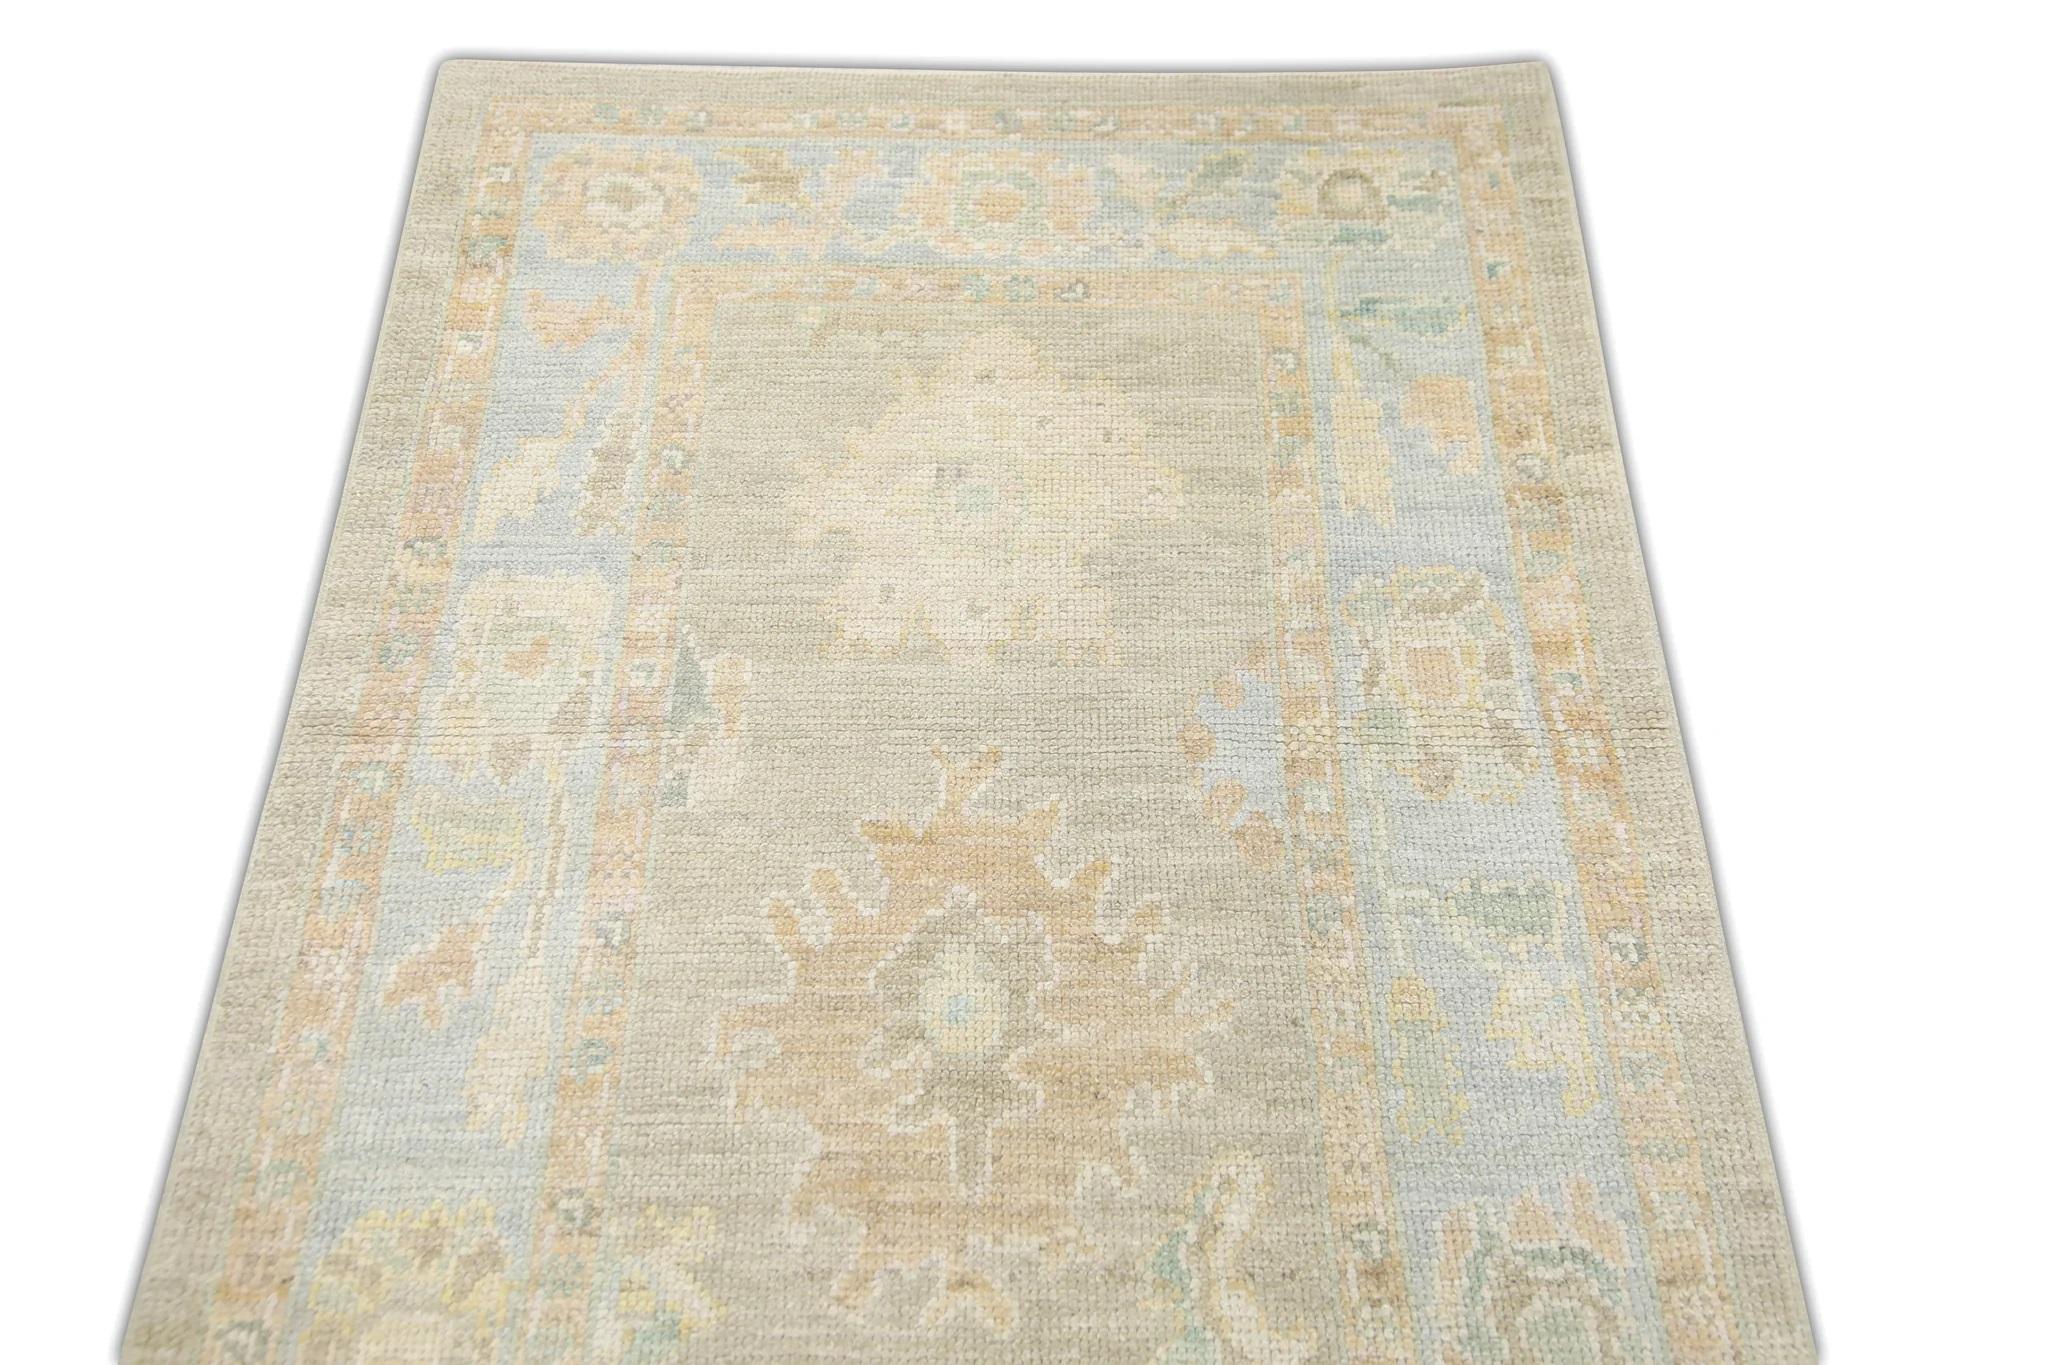 Vegetable Dyed Brown and Blue Floral Design Handwoven Wool Turkish Oushak Rug 3' x 5'5